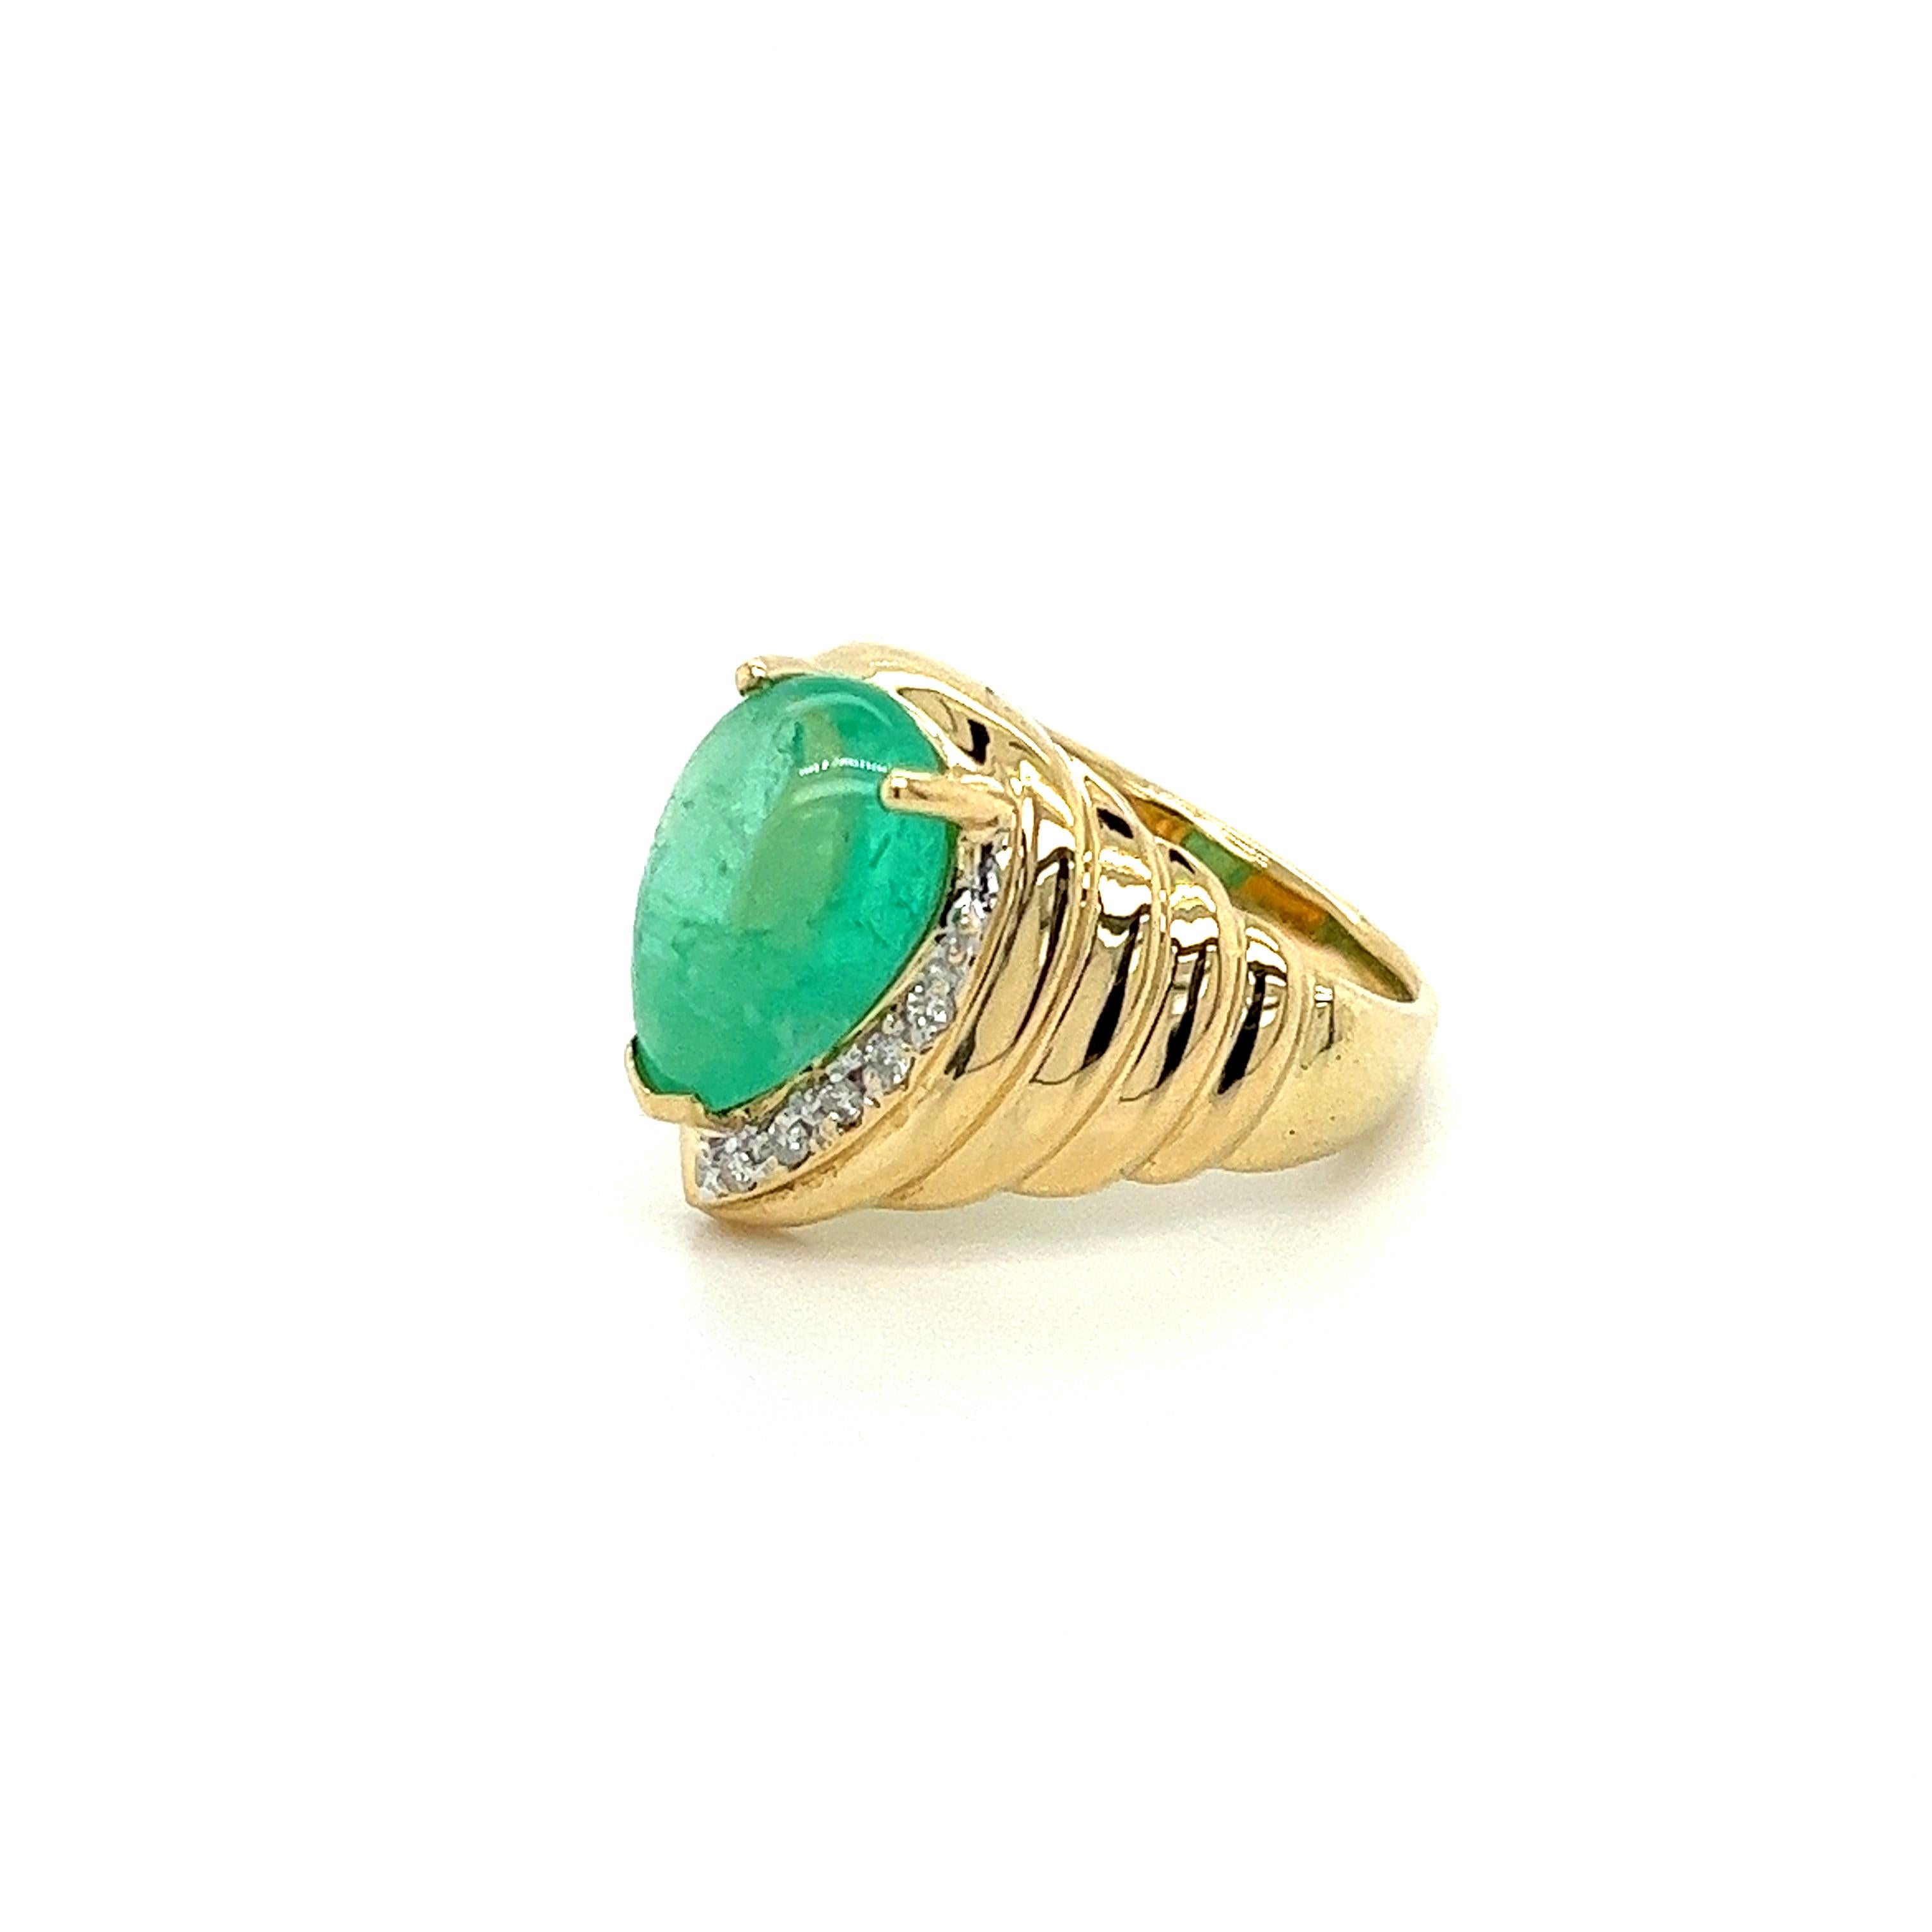 Art Deco 7.81 Carat Pear Shaped Cabochon Emerald Ring with Round Diamonds in 18K Gold For Sale